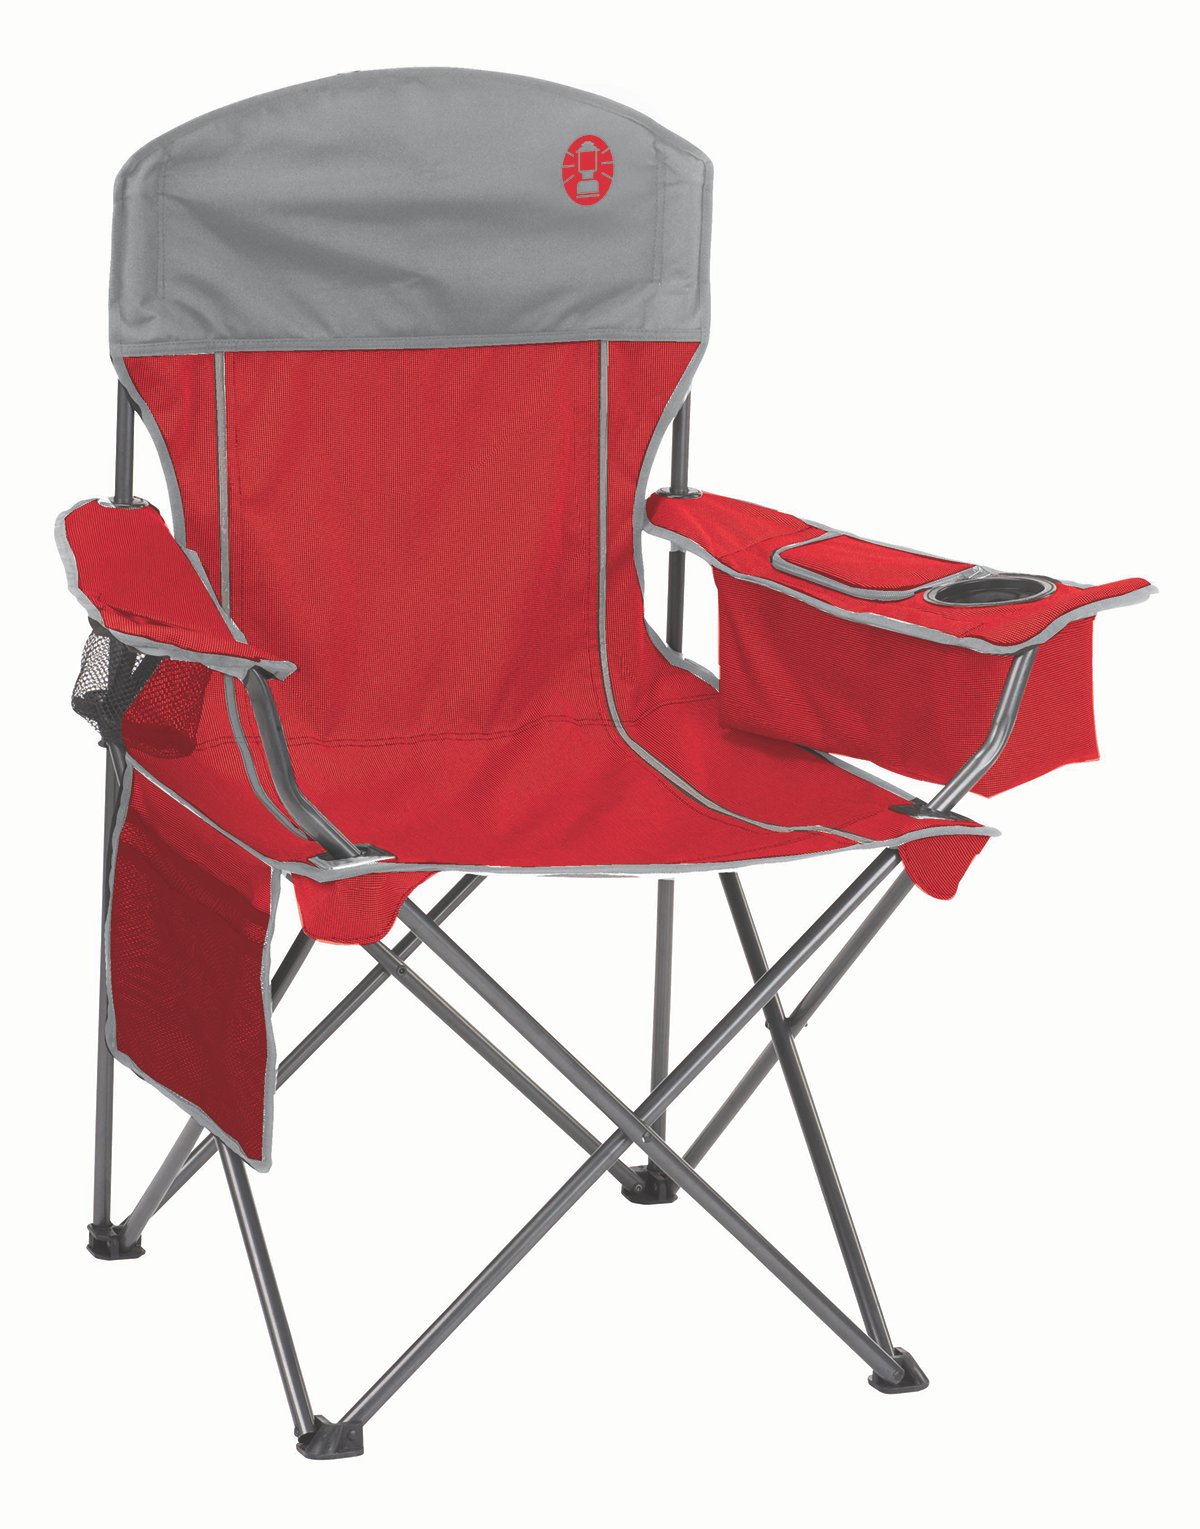 Quad Chair with Cooler | Coleman CA